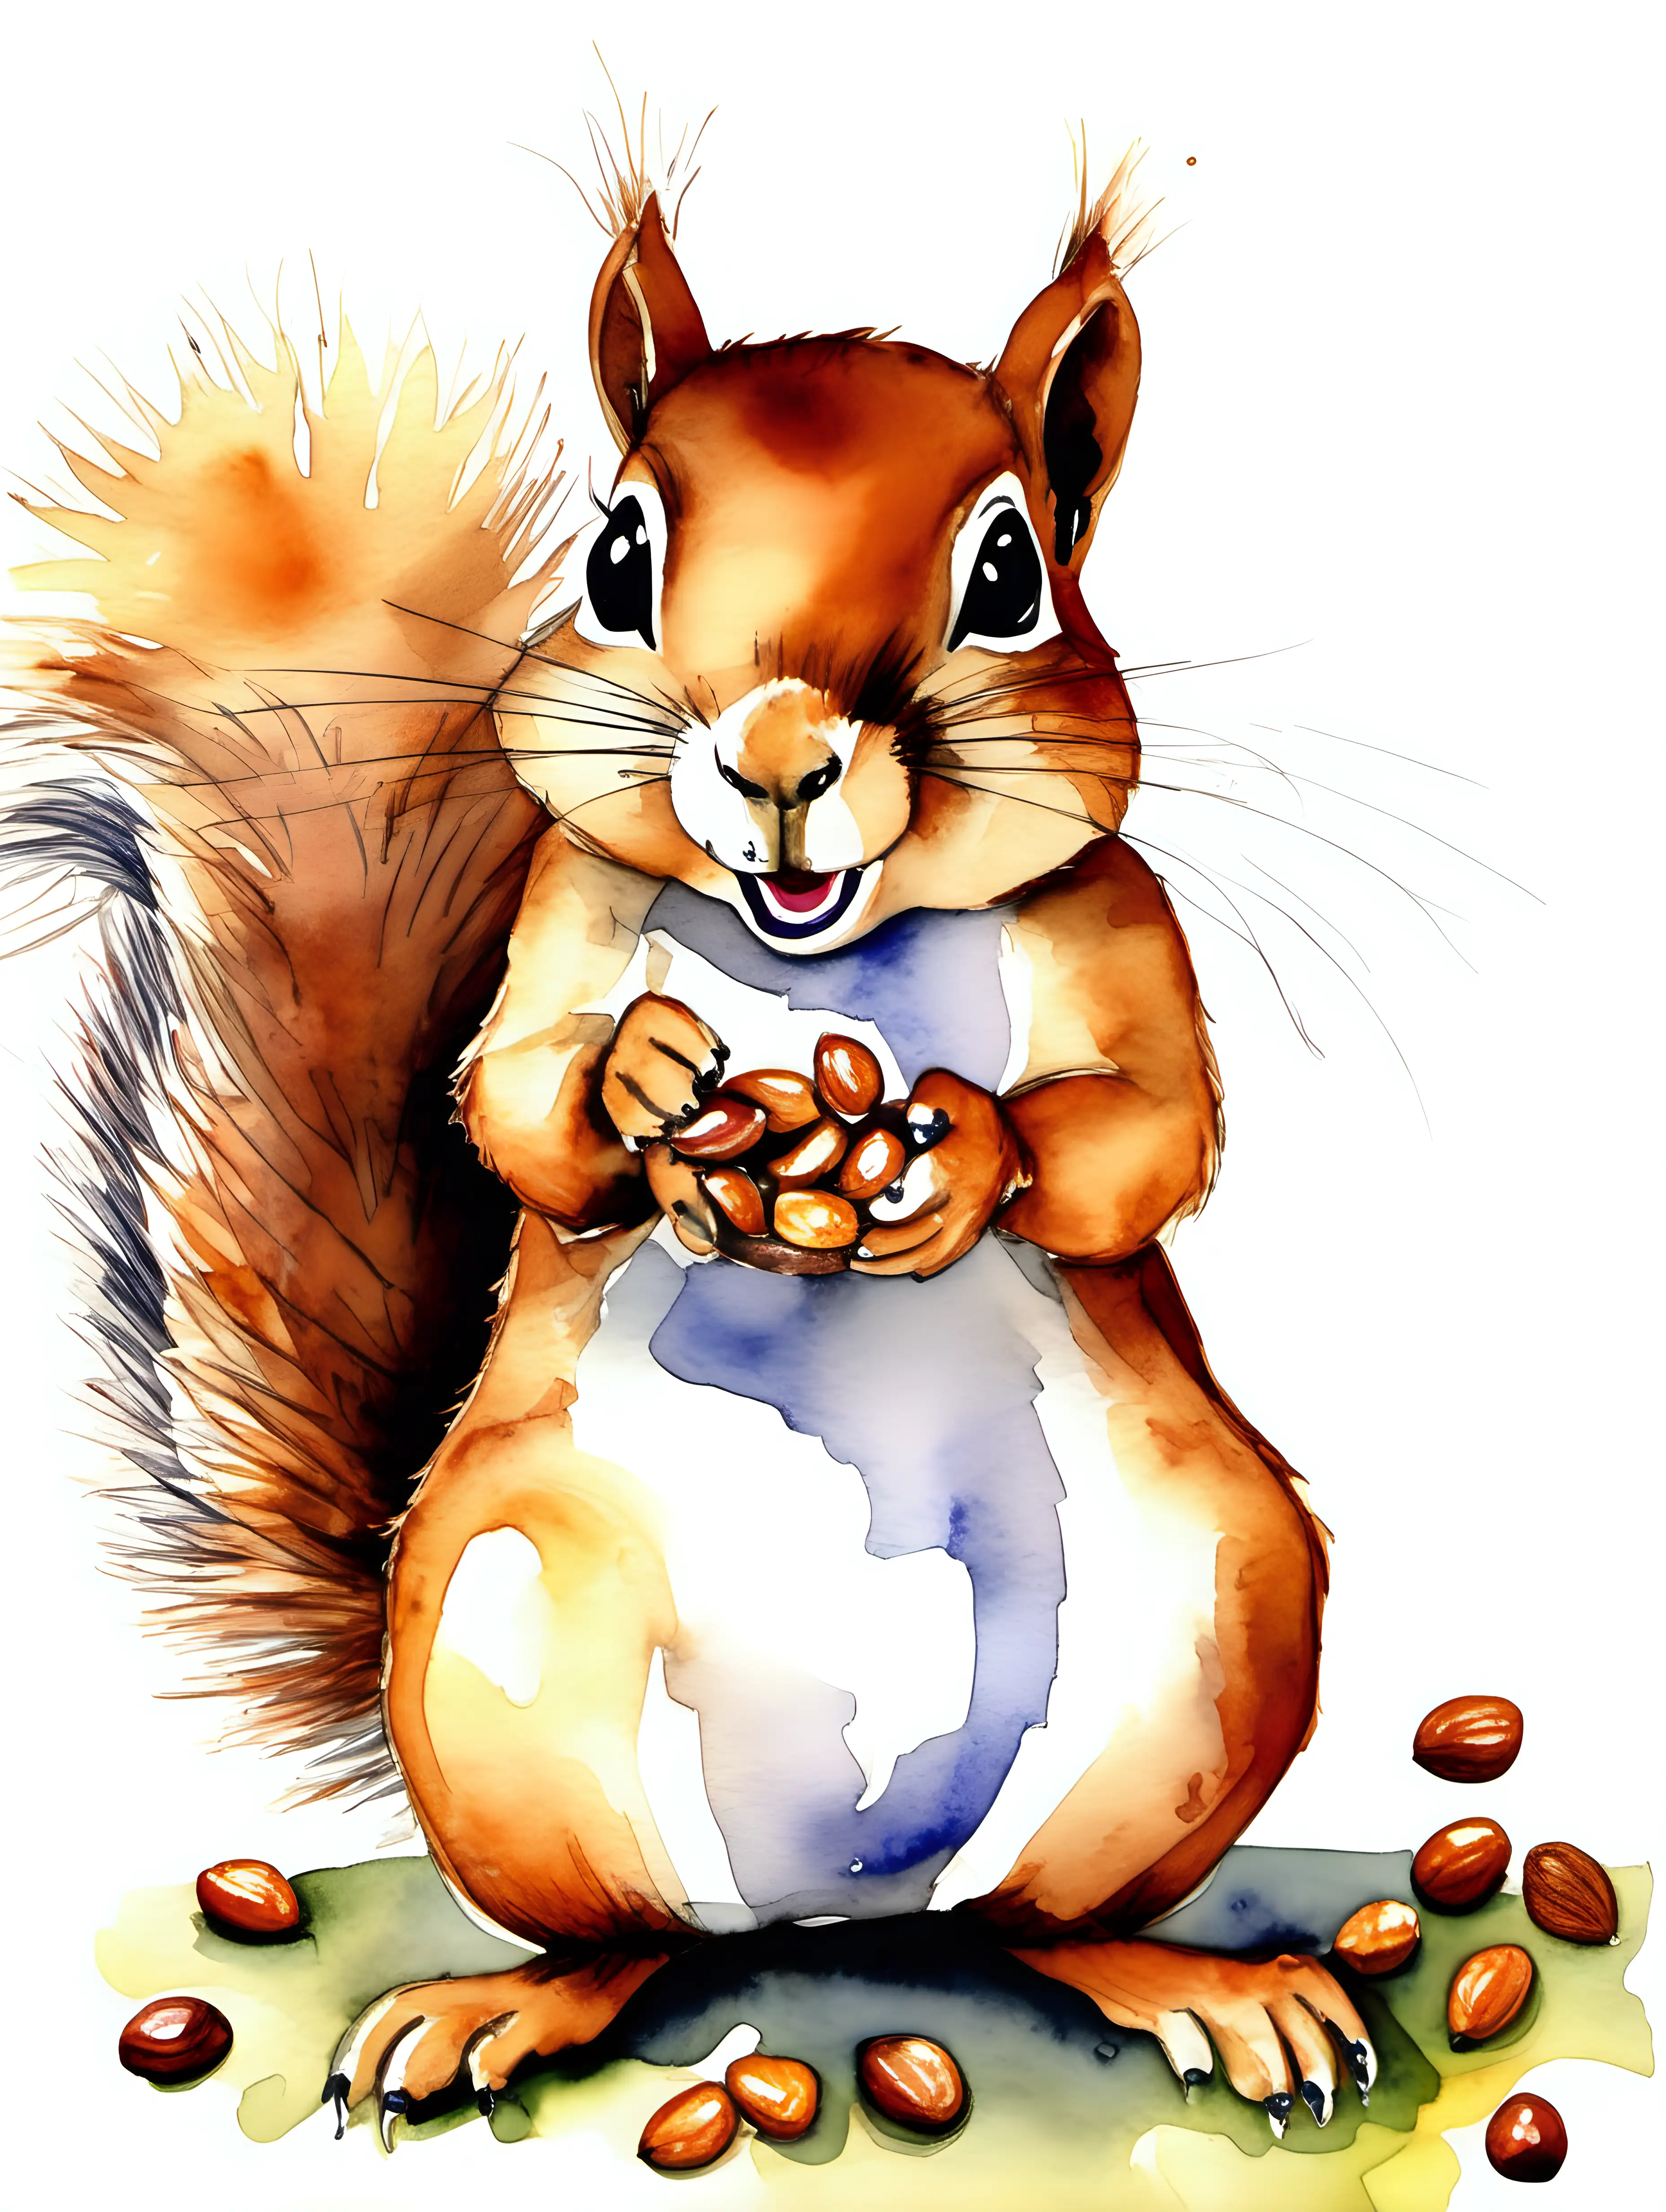 Adorable Watercolor Illustration of a Plump Squirrel with Cheeks Full of Nuts